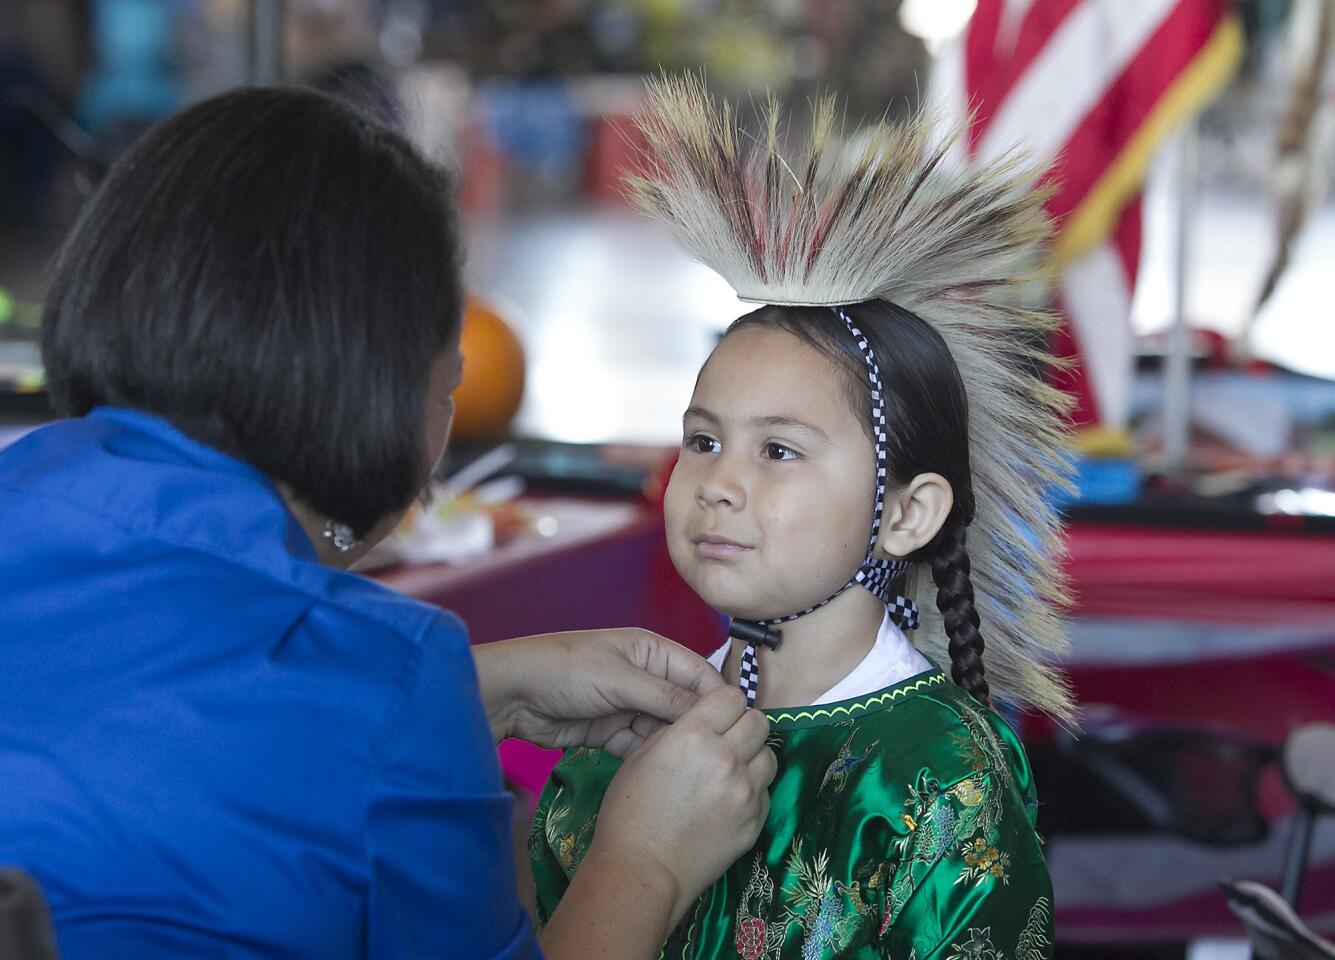 49th Annual Pow-Wow Brings Color and Tradition to OC